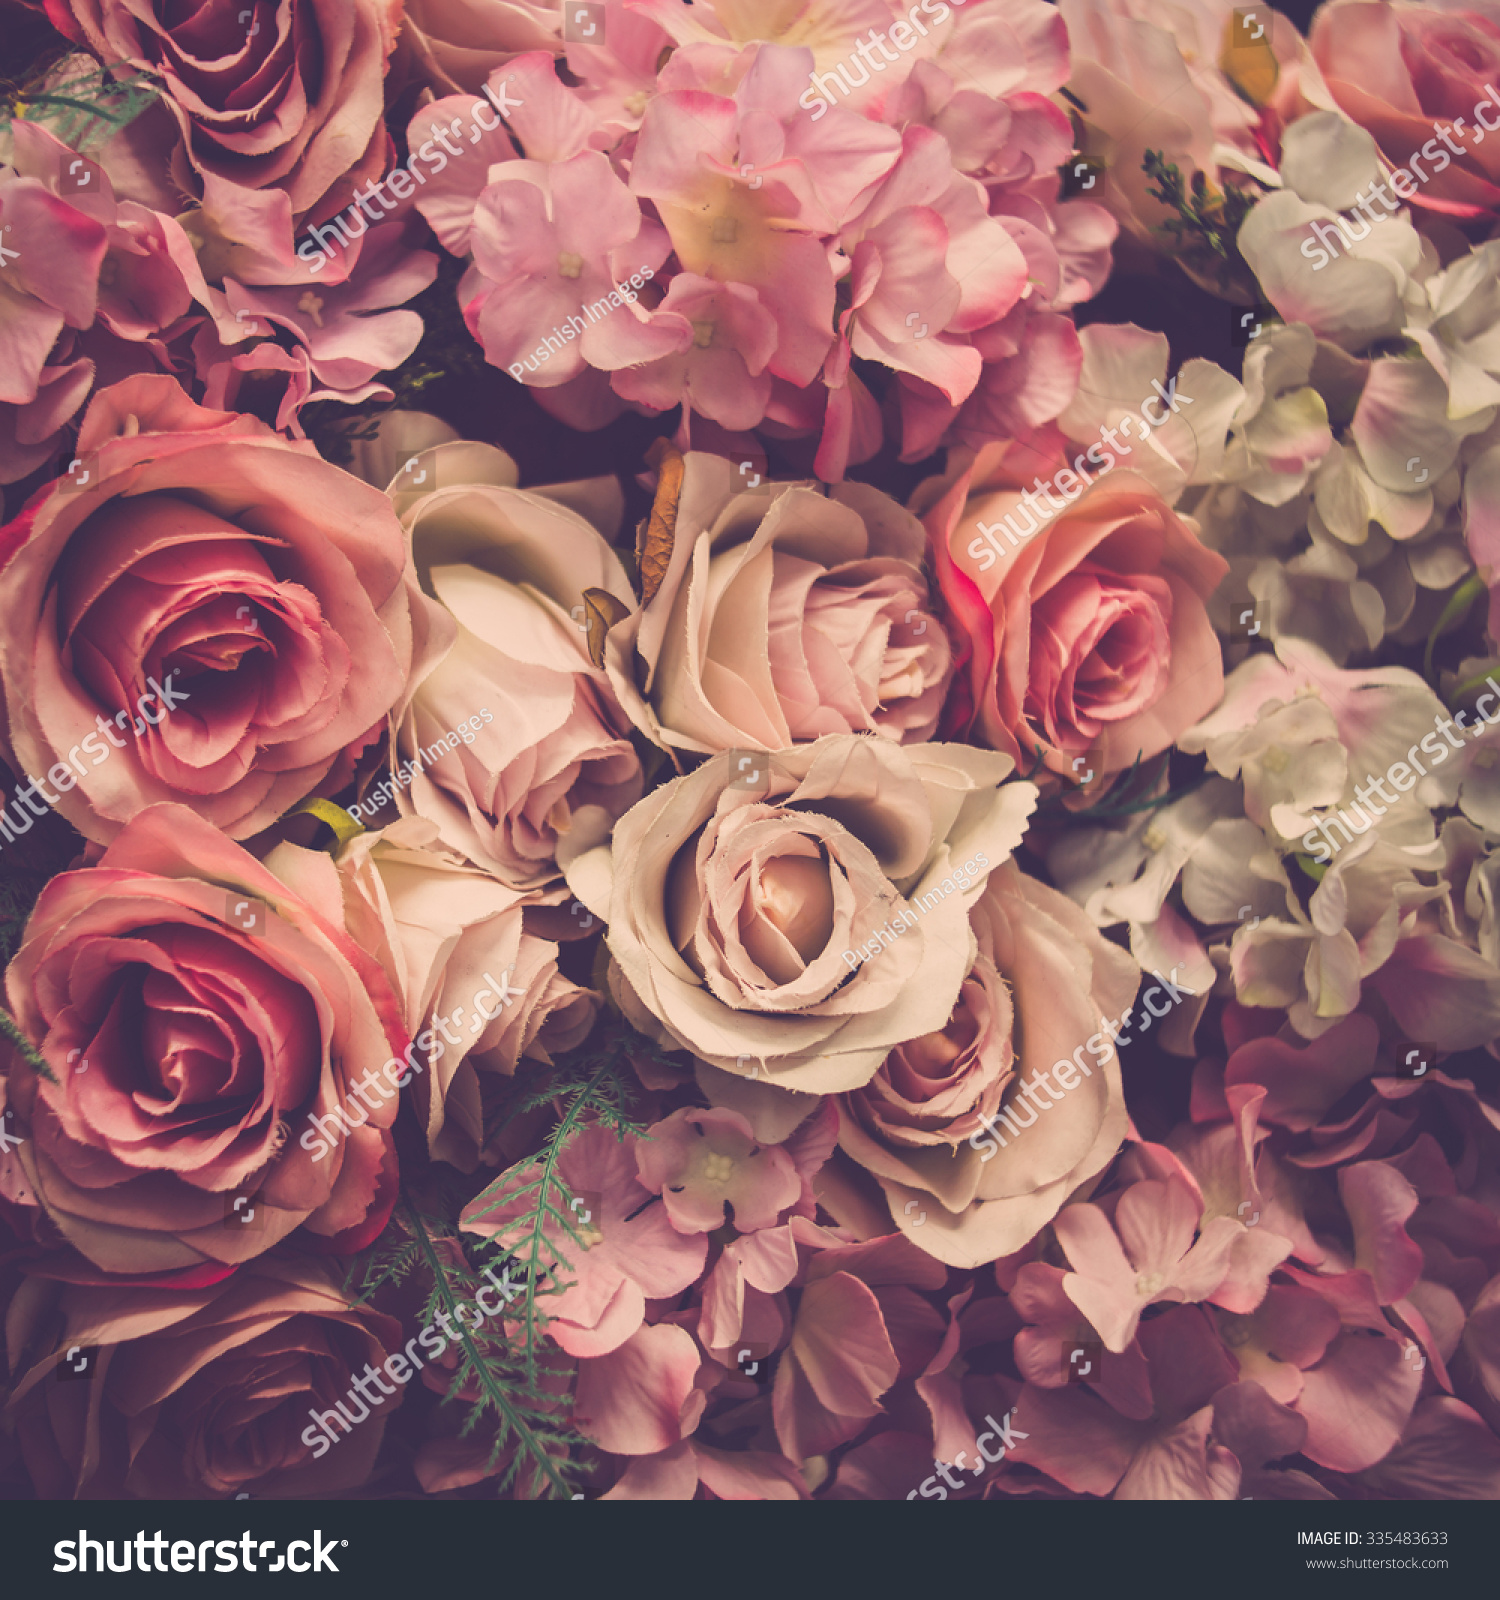 Pink Roses Background Retro Filter Stock Photo 335483633